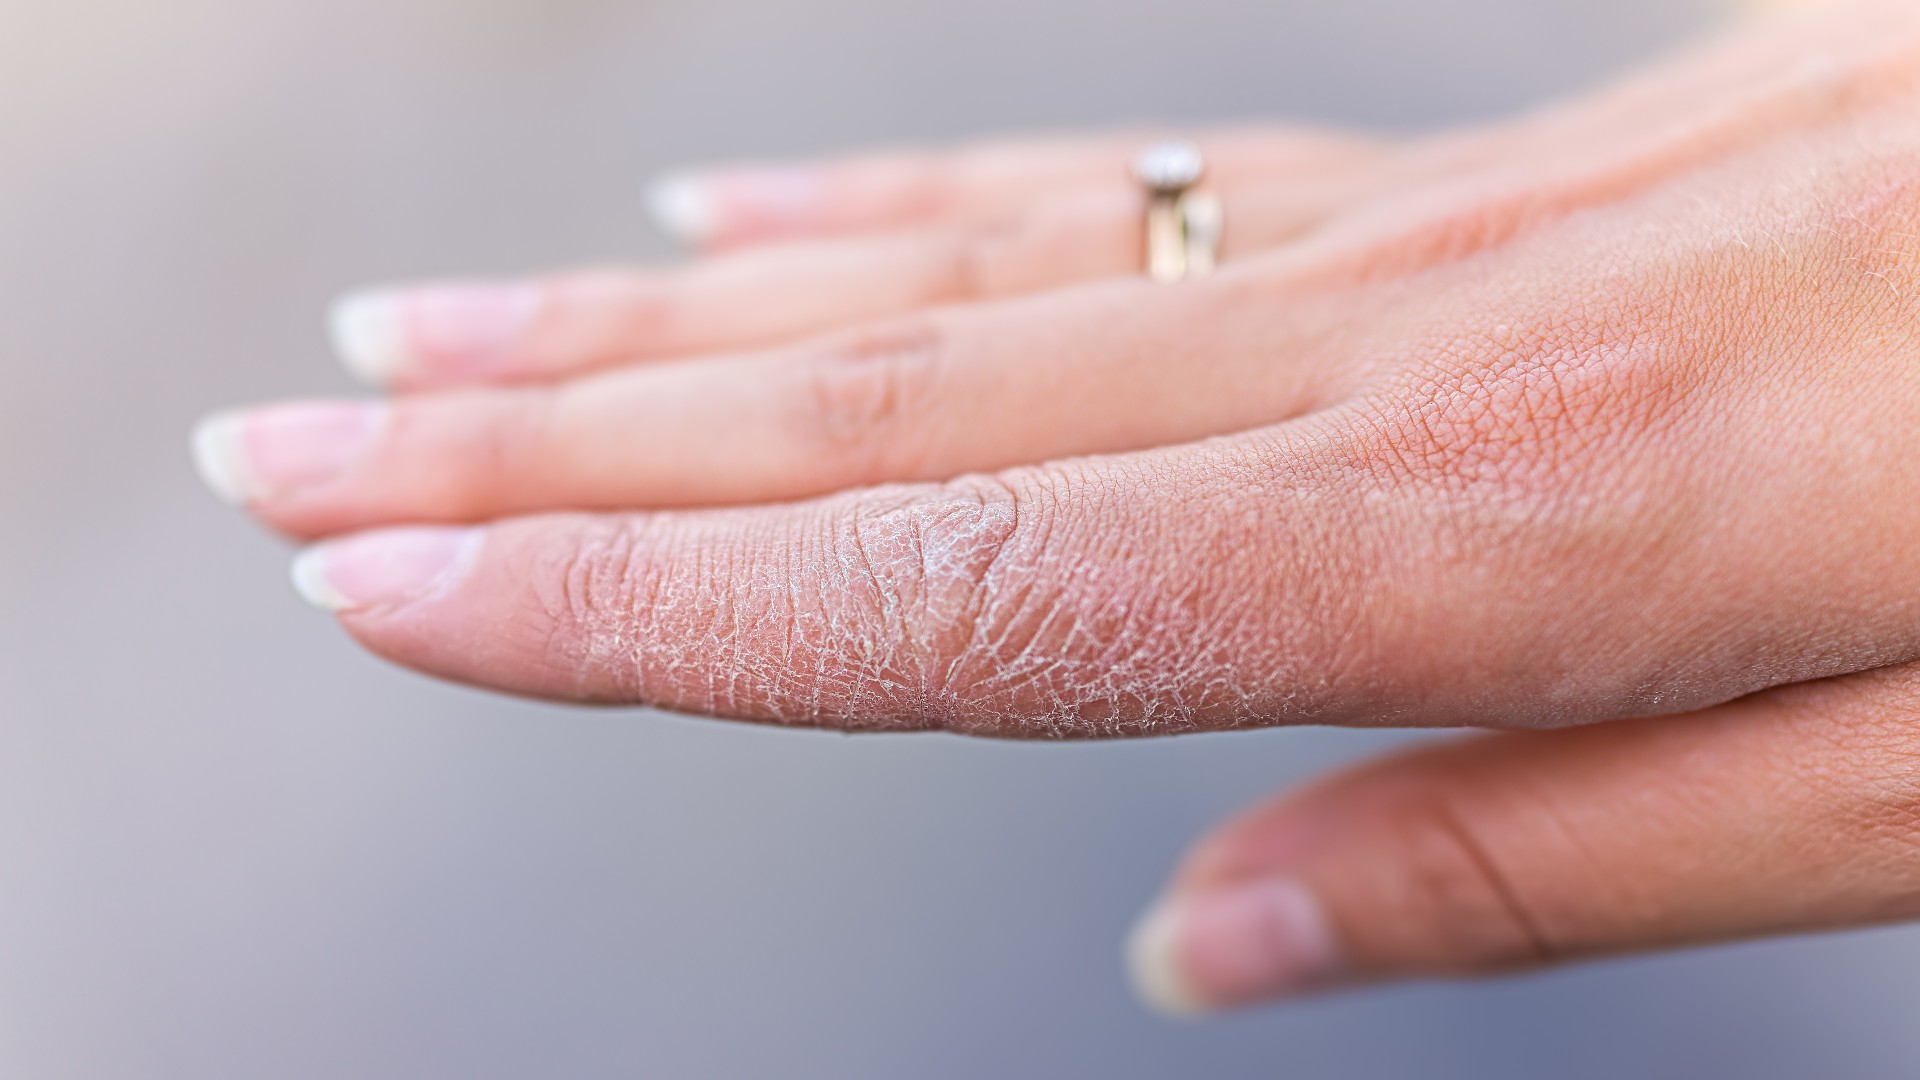 Close-up of dry skin on a woman's hand